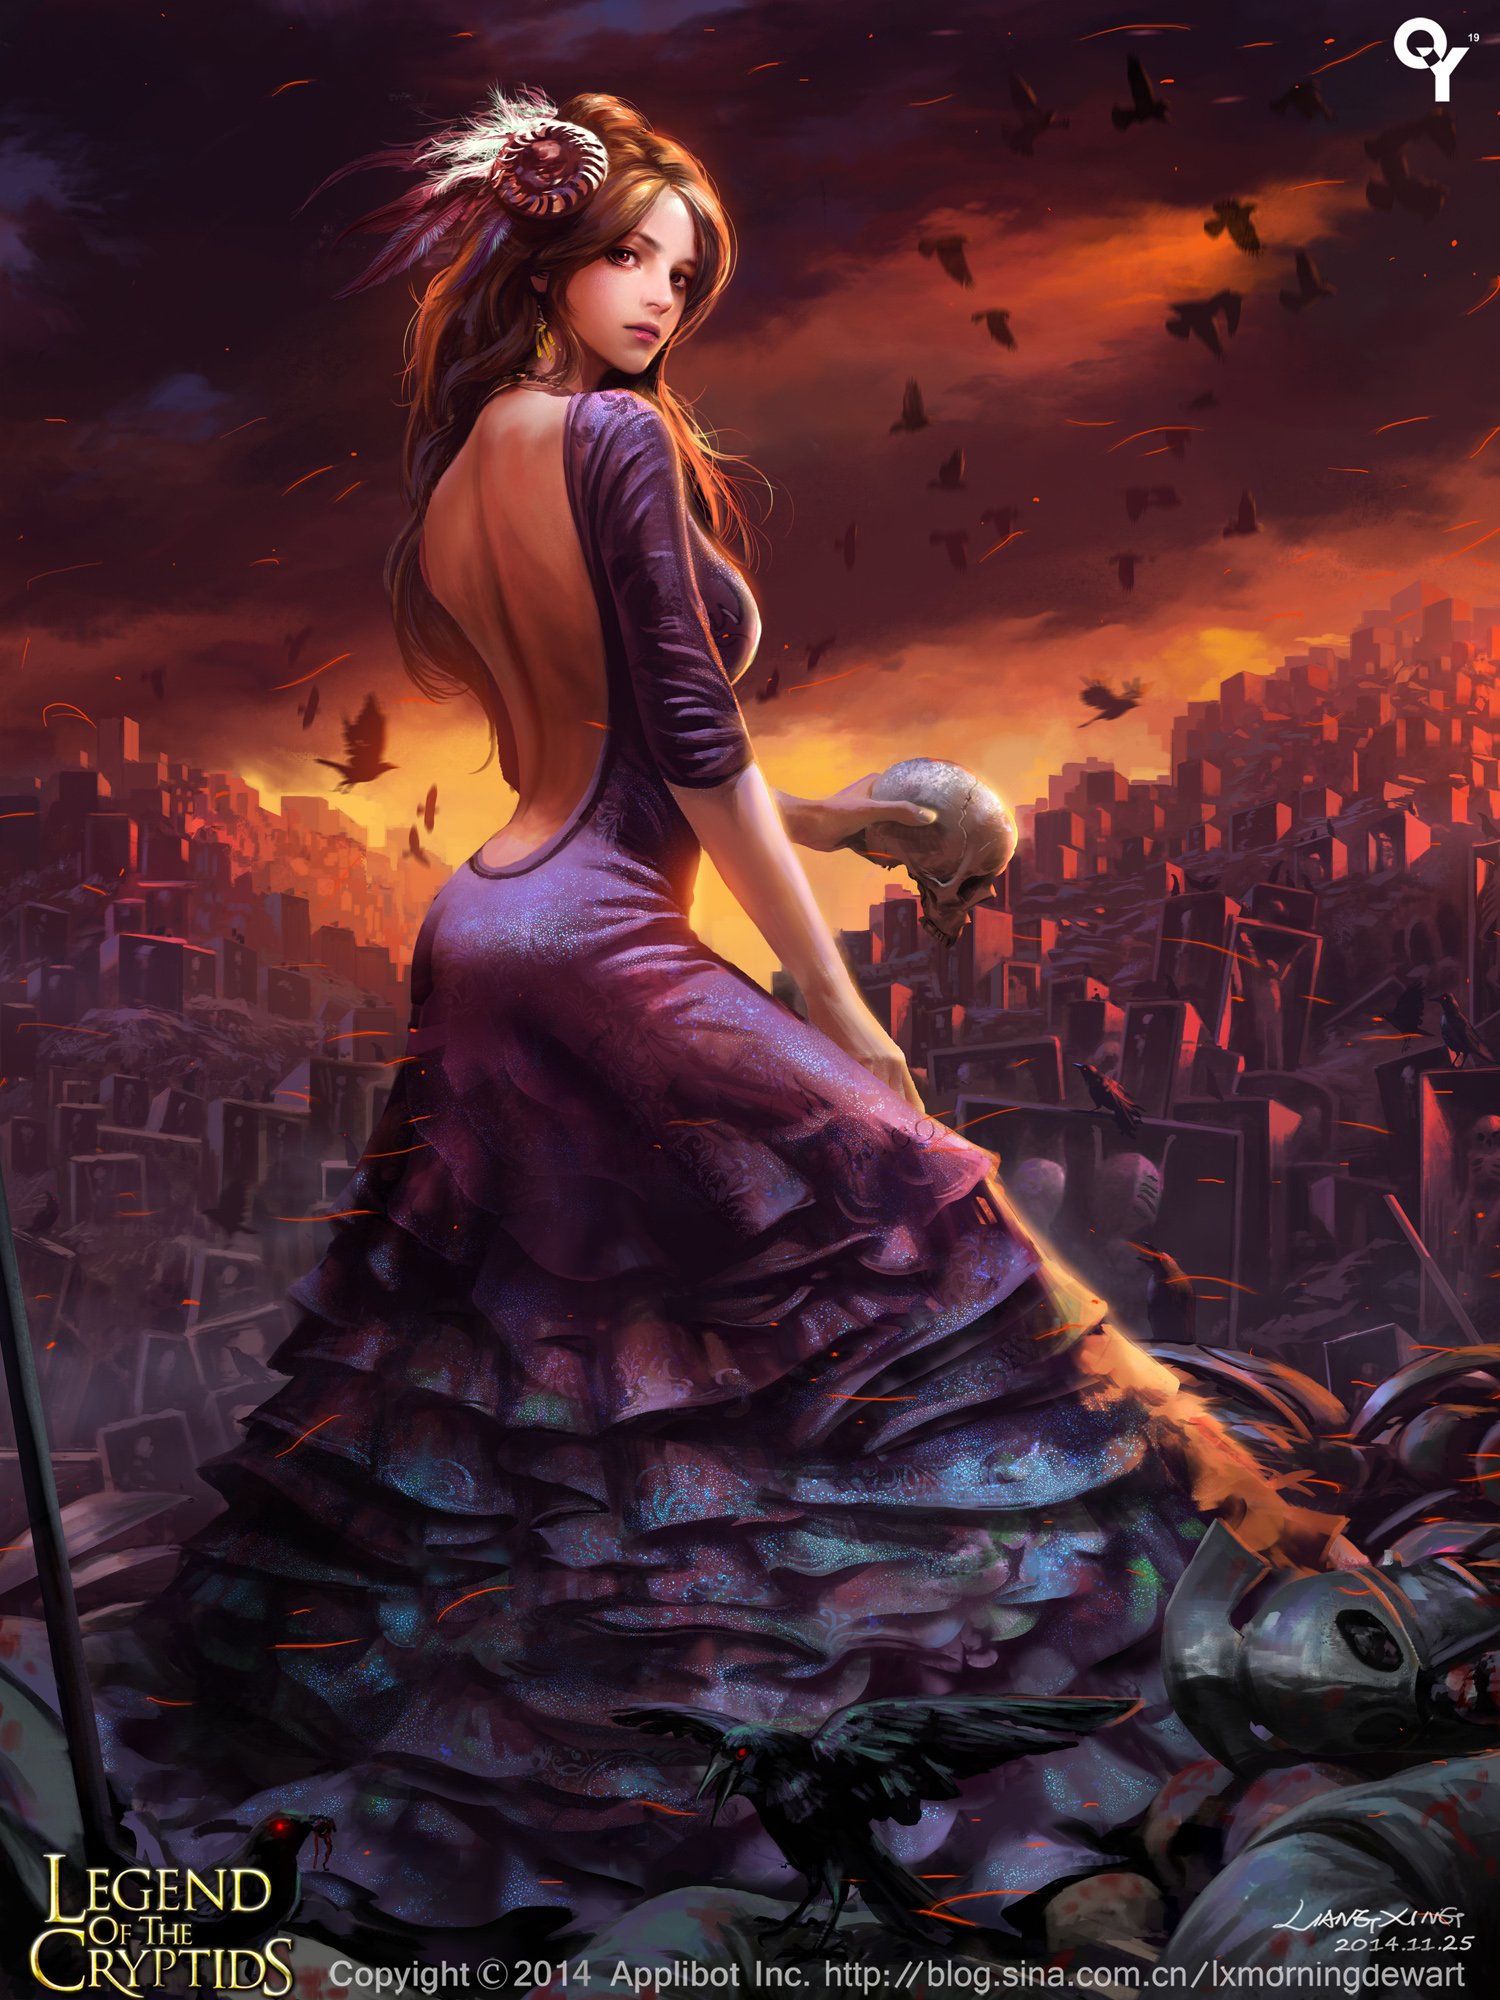 bird, Brown, Hair, Dress, Jewelry, Long, Hair, Red, Eyes, Sky, Sunset, Legend, Of, The, Cryptids Wallpaper